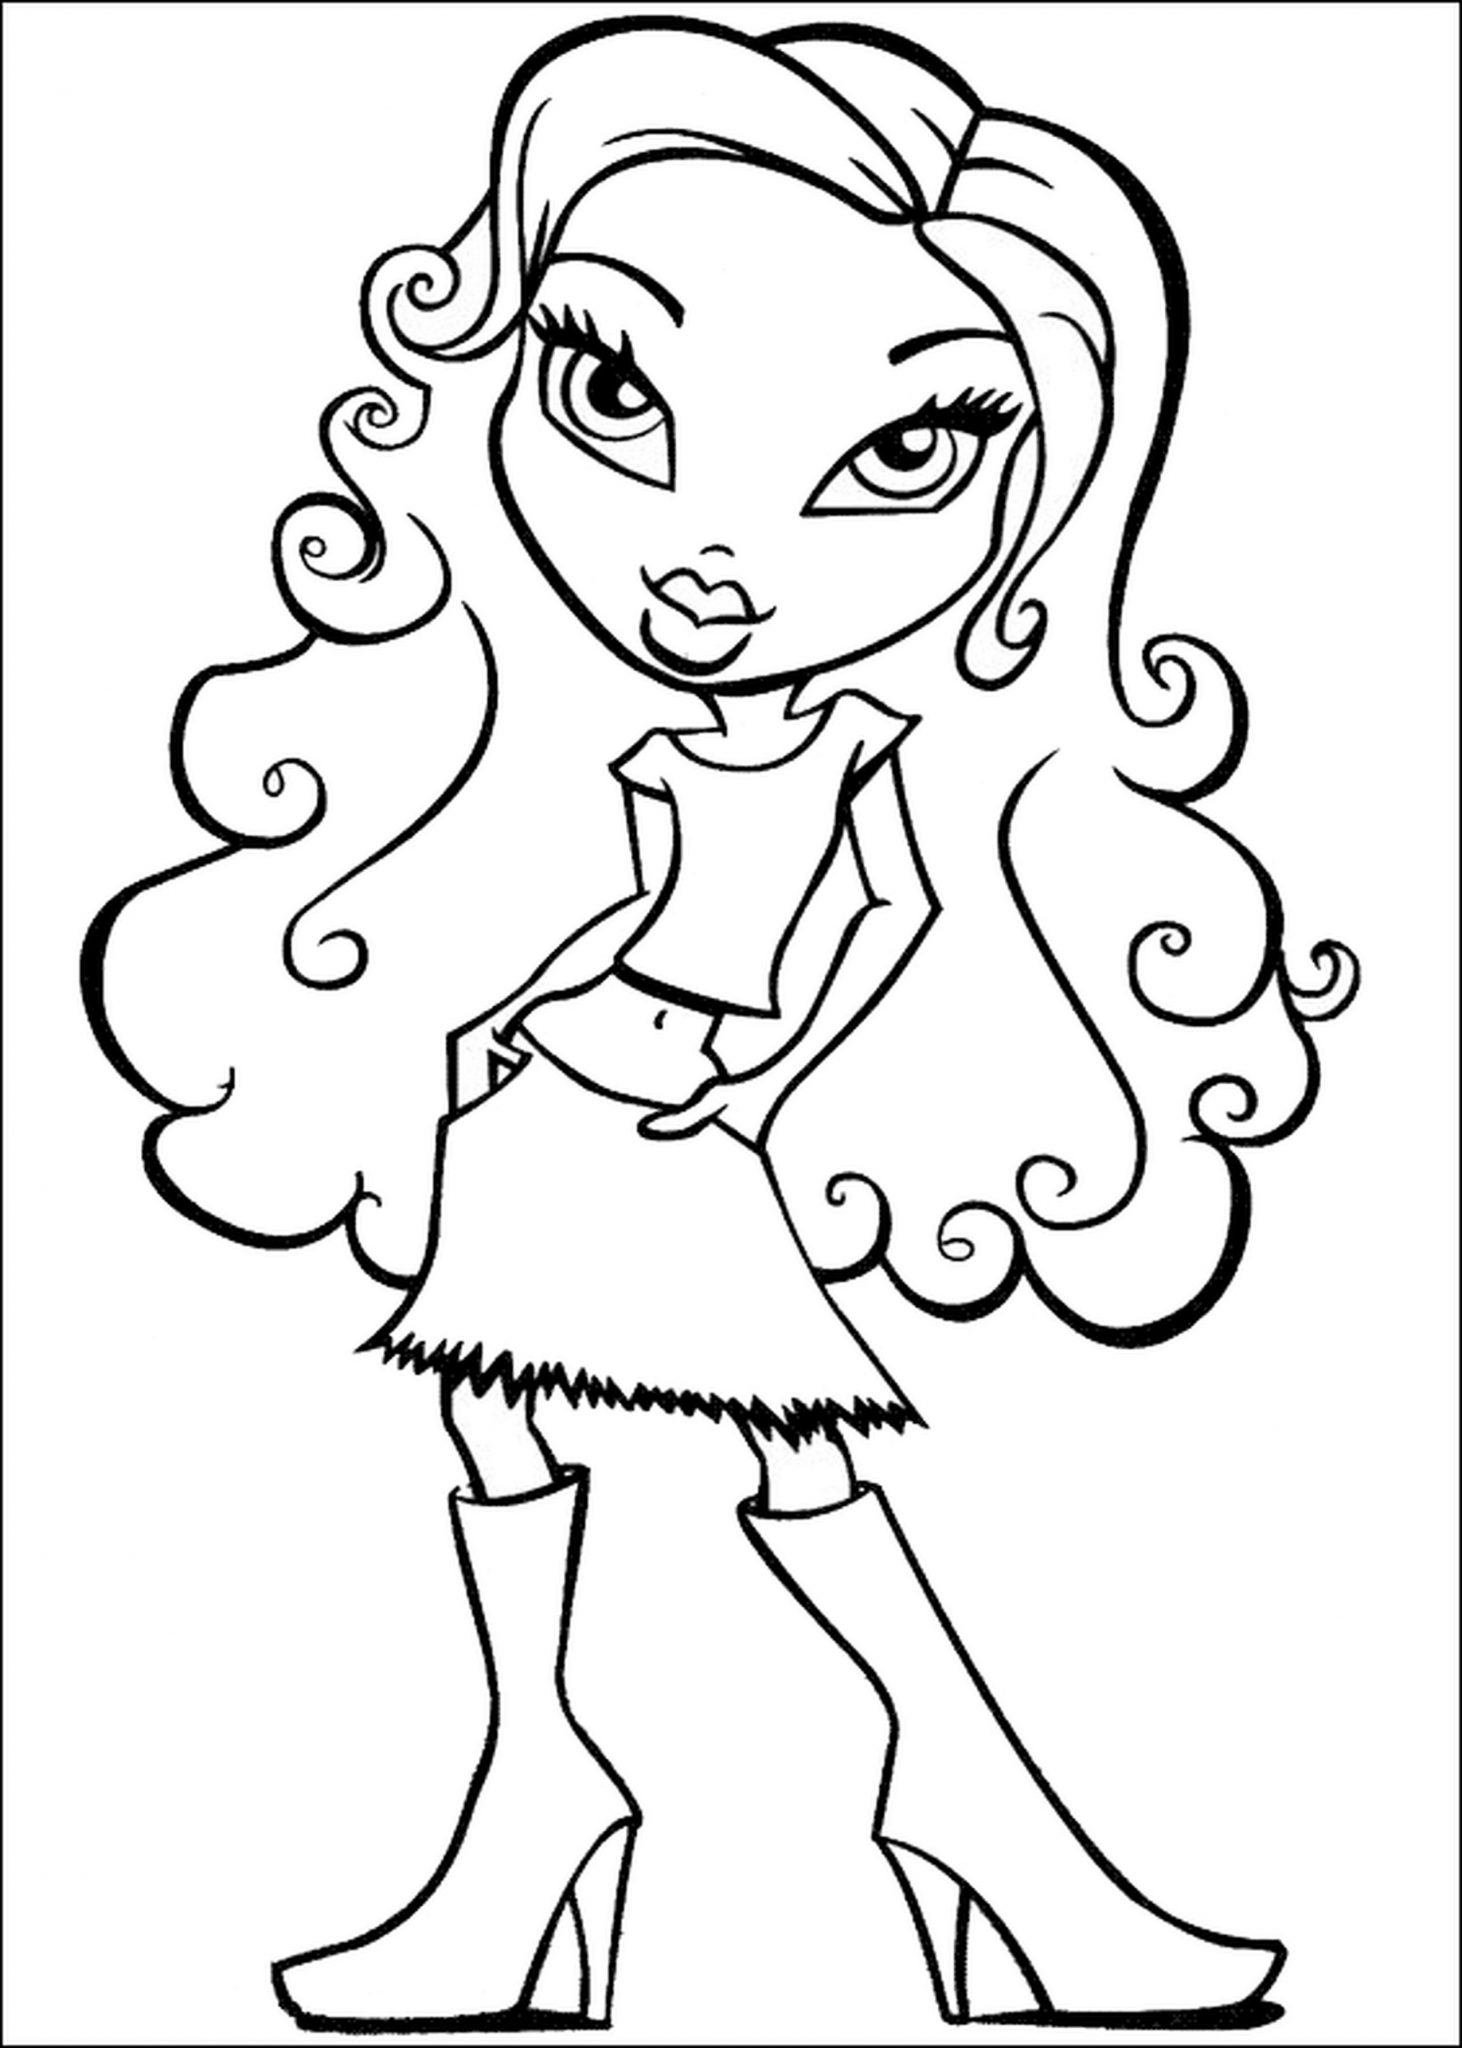 Print & Download - Coloring Pages for Girls, Recommend a Hobby To A Child